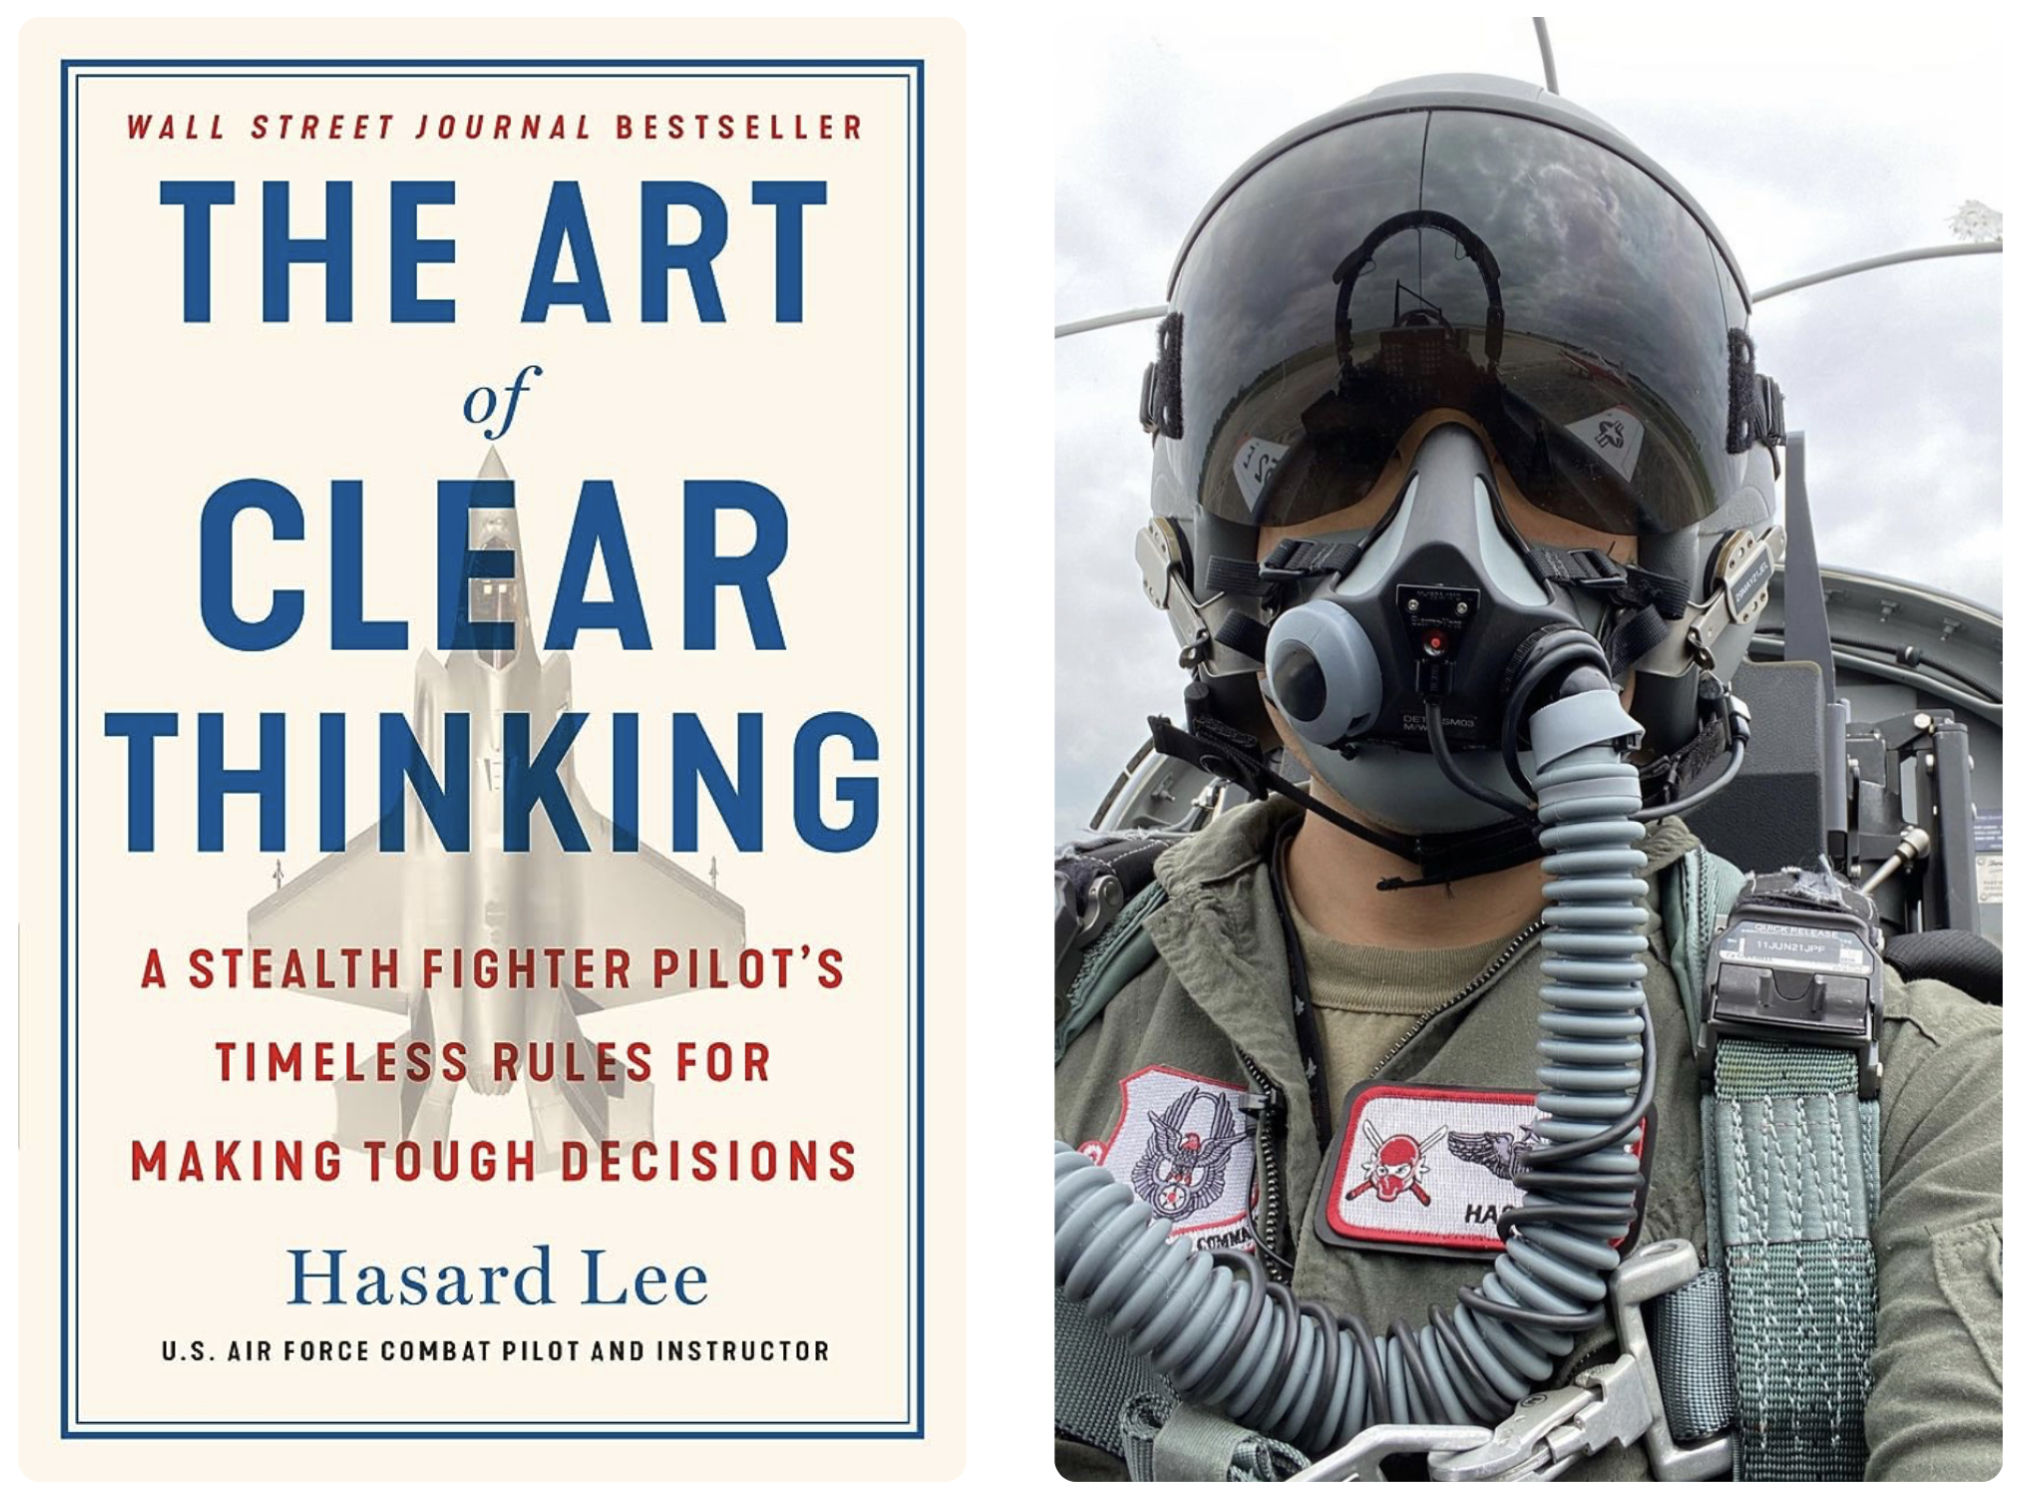 Lessons from a Fighter Pilot